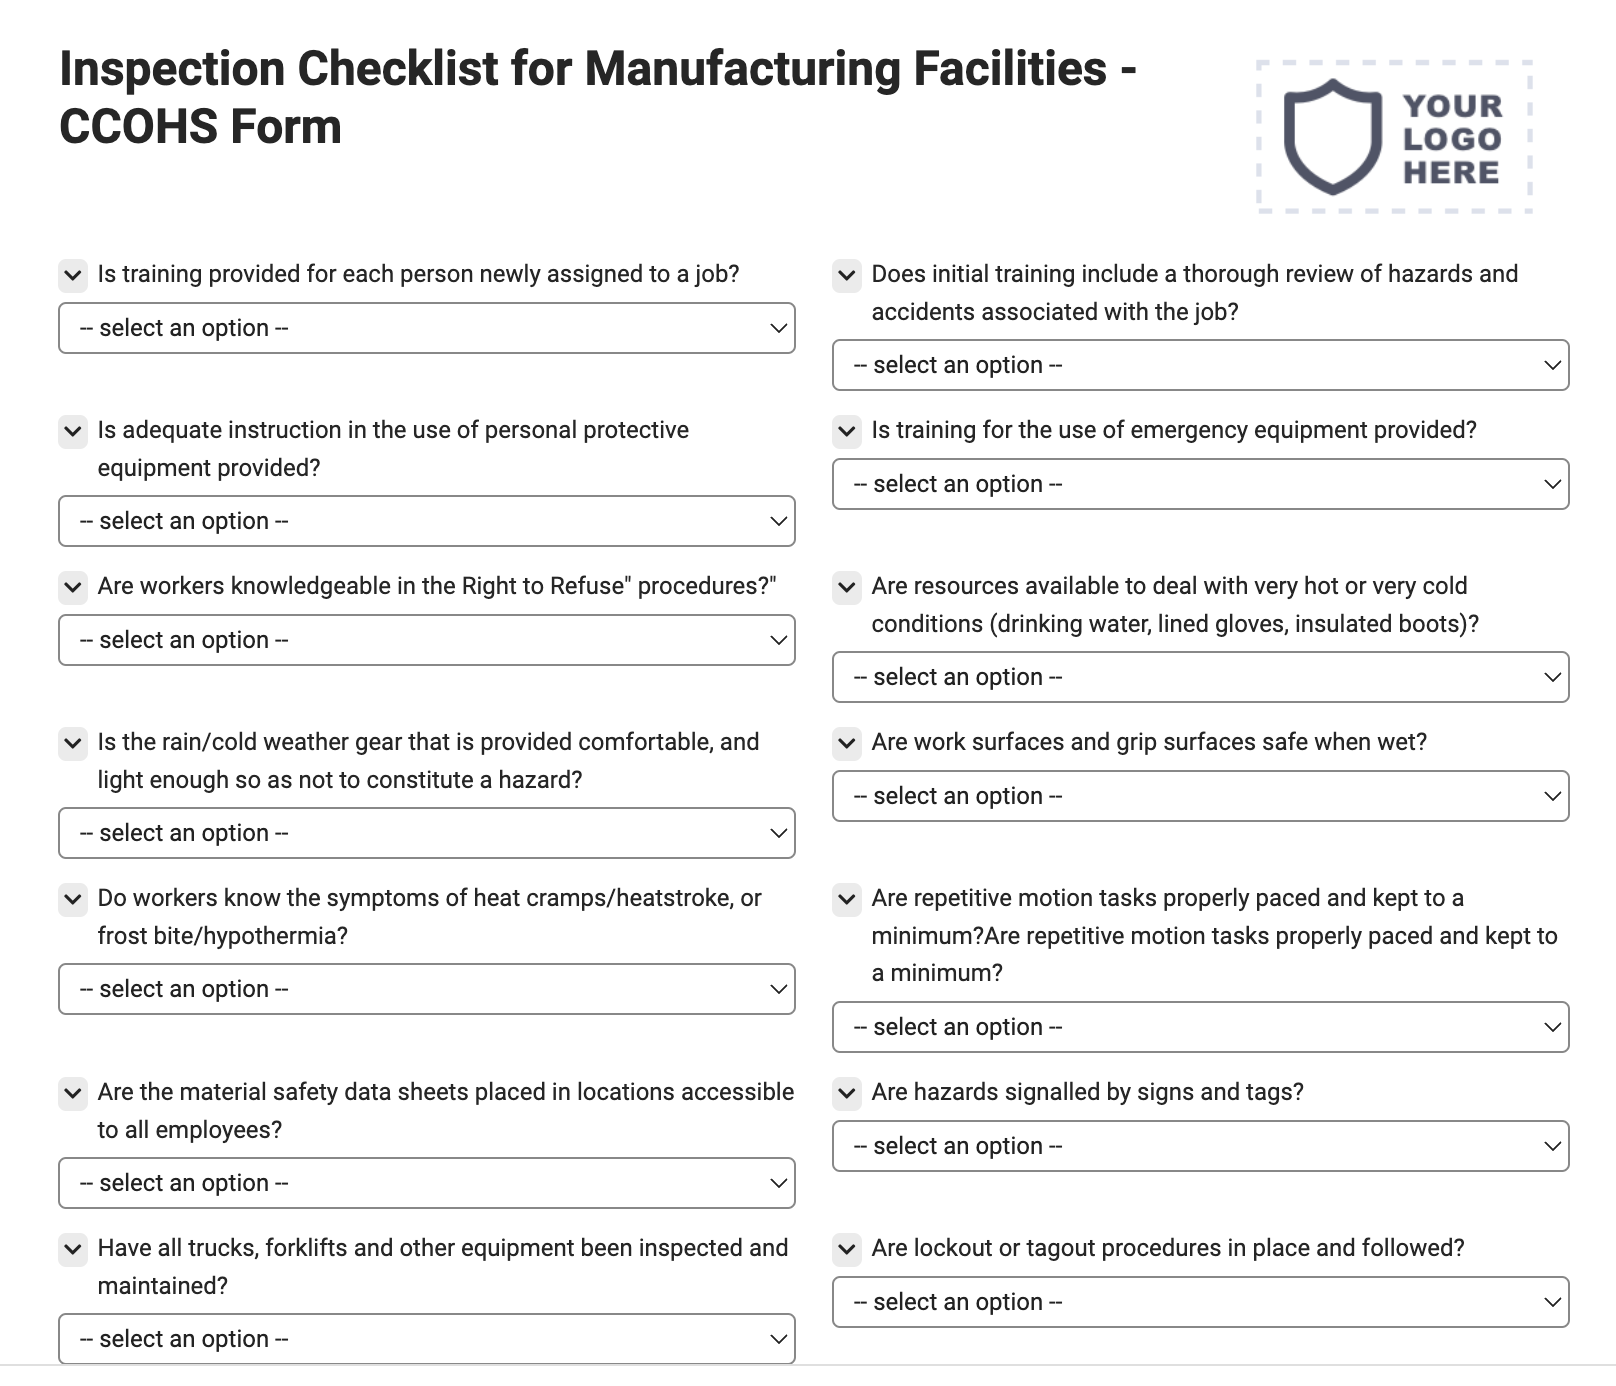 Inspection Checklist for Manufacturing Facilities - CCOHS